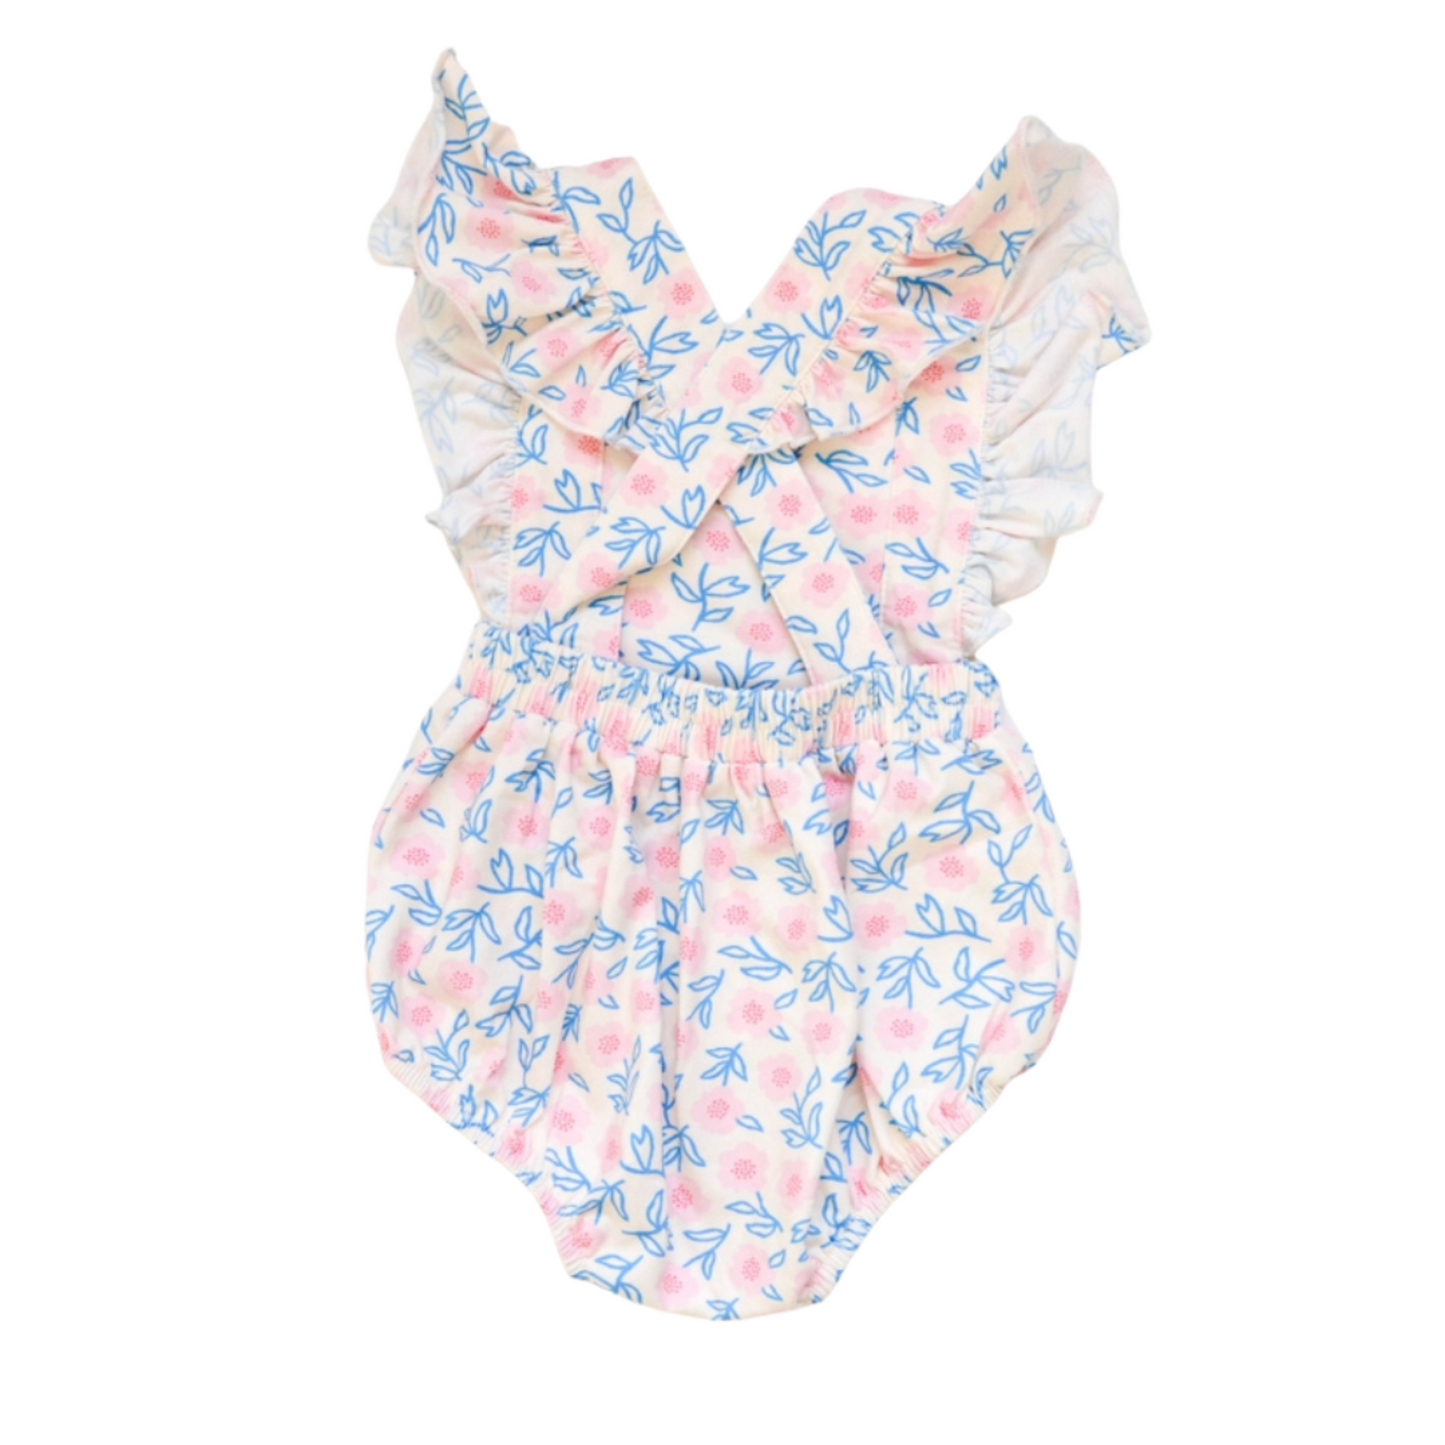 Our Emmy Romper is super soft and stretchy for little ones who love to move! This adorable spring print is the perfect little sister summer outfit for our matching Olivia Dress! Featuring ruffled details along the shoulders and down the back, as well as adjustable straps for growing babes. A three-snap closure makes for easy diaper changes.